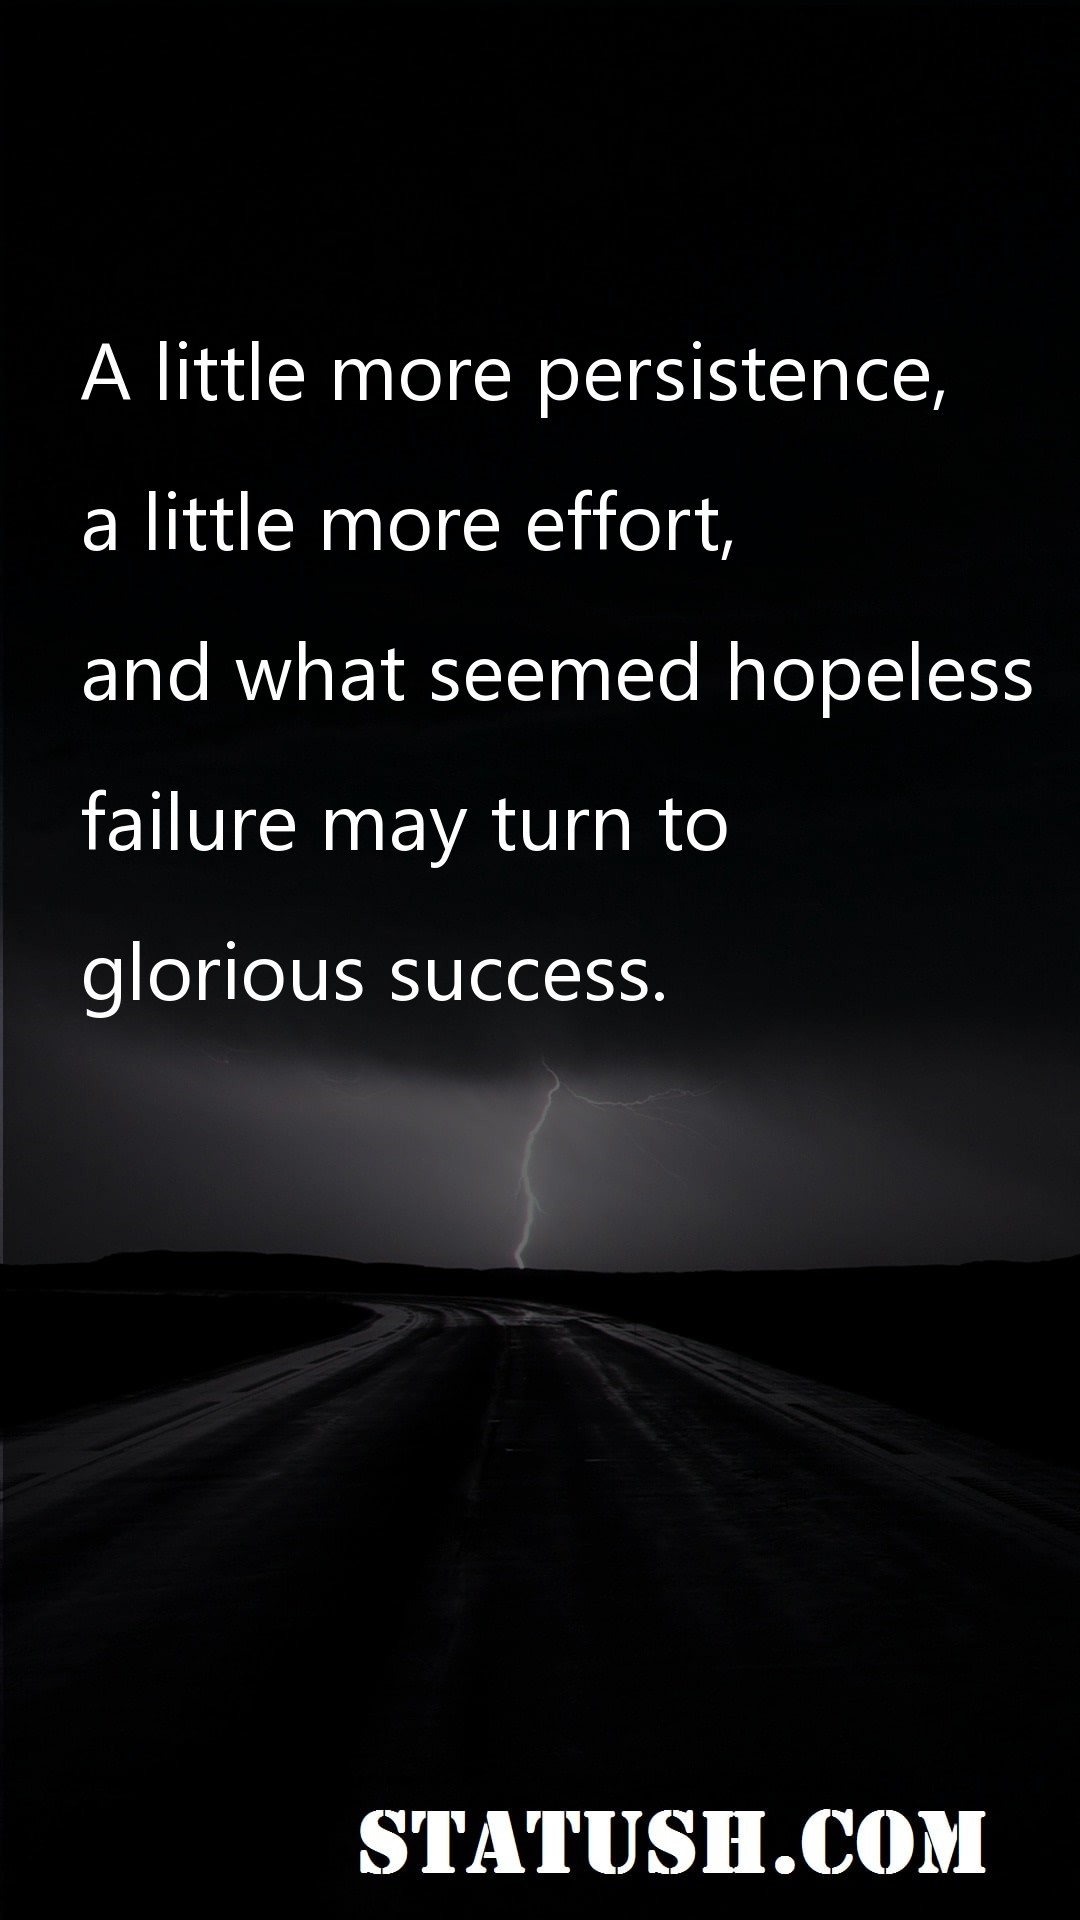 A little more persistence - Success Quotes at statush.com